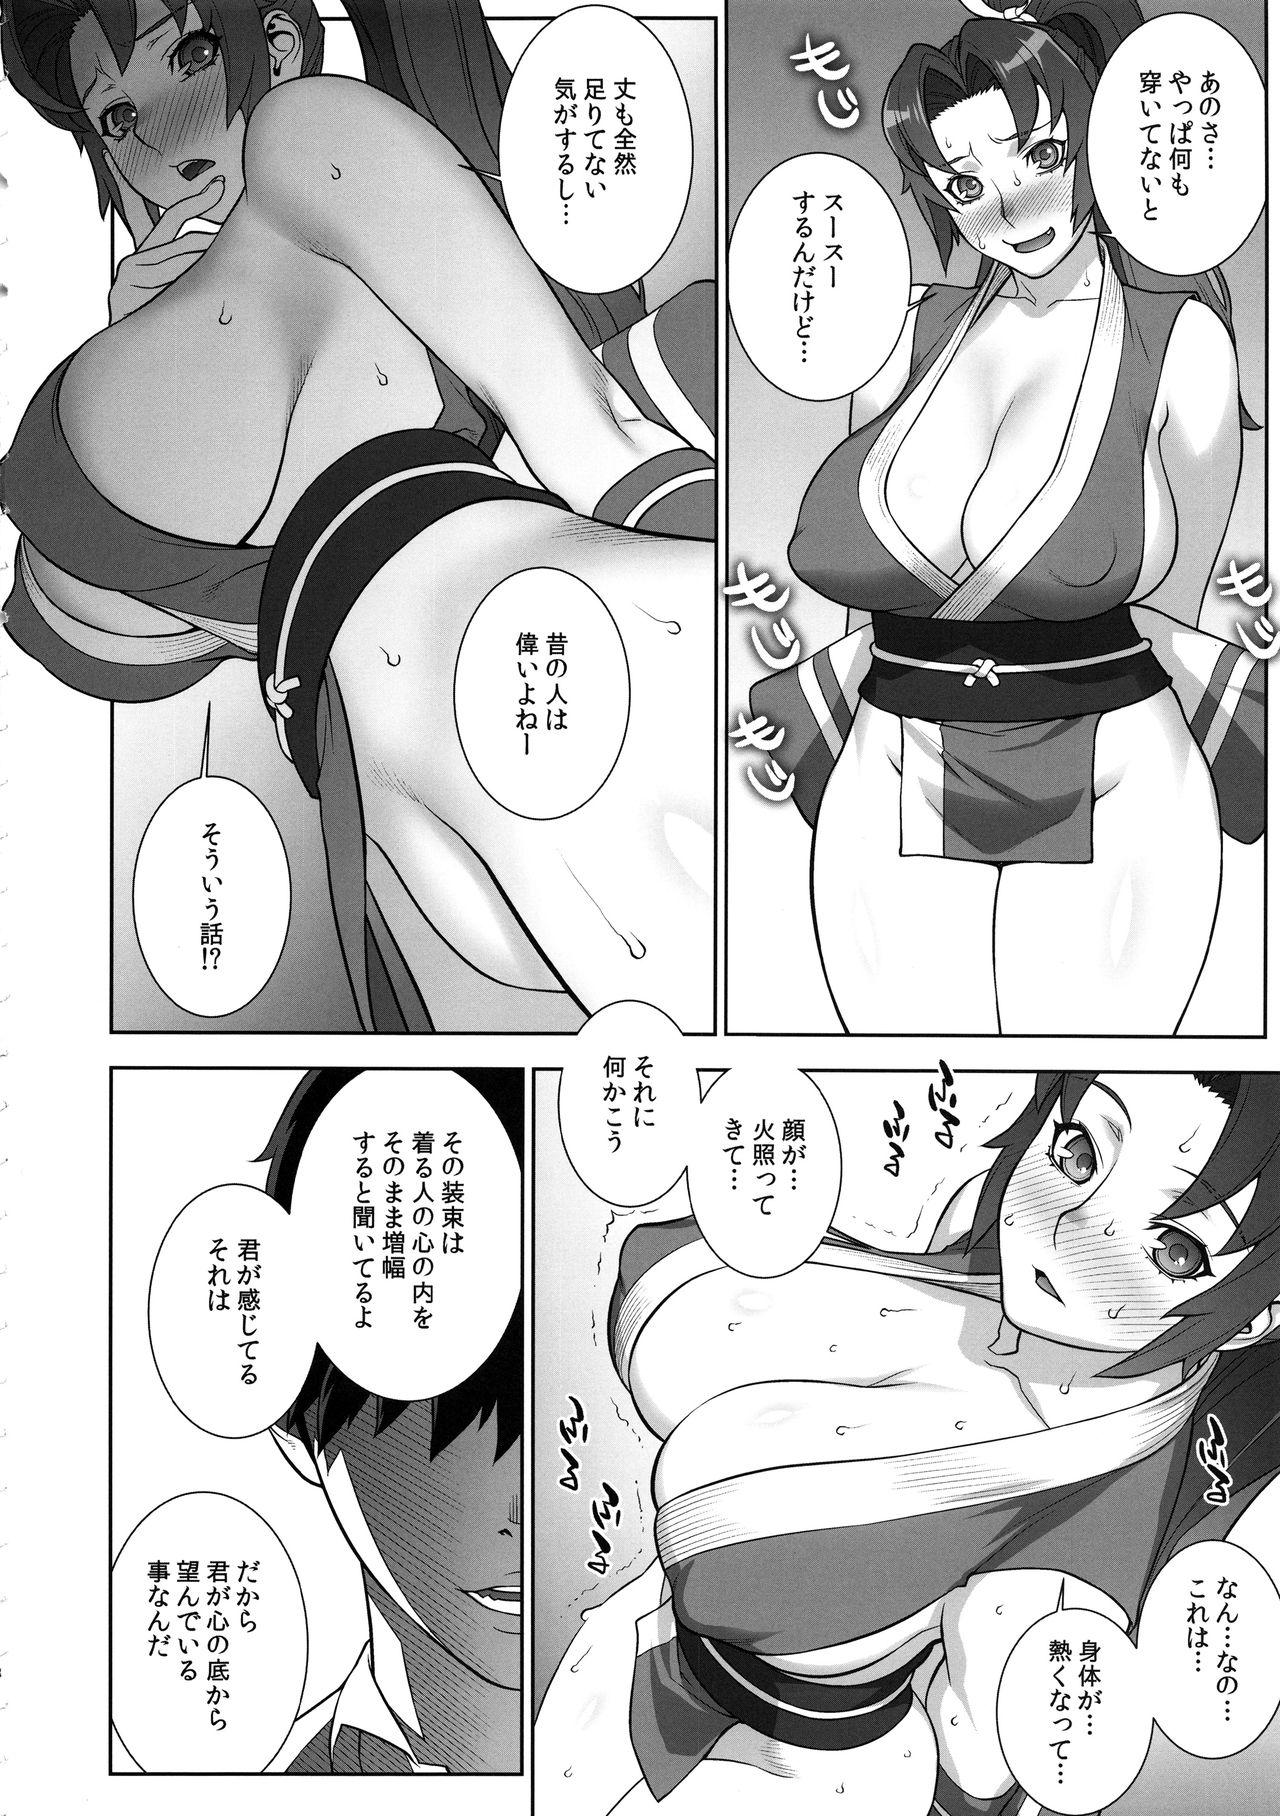 Hot Pussy Domidare Kachousen - King of fighters Hot Fuck - Page 7